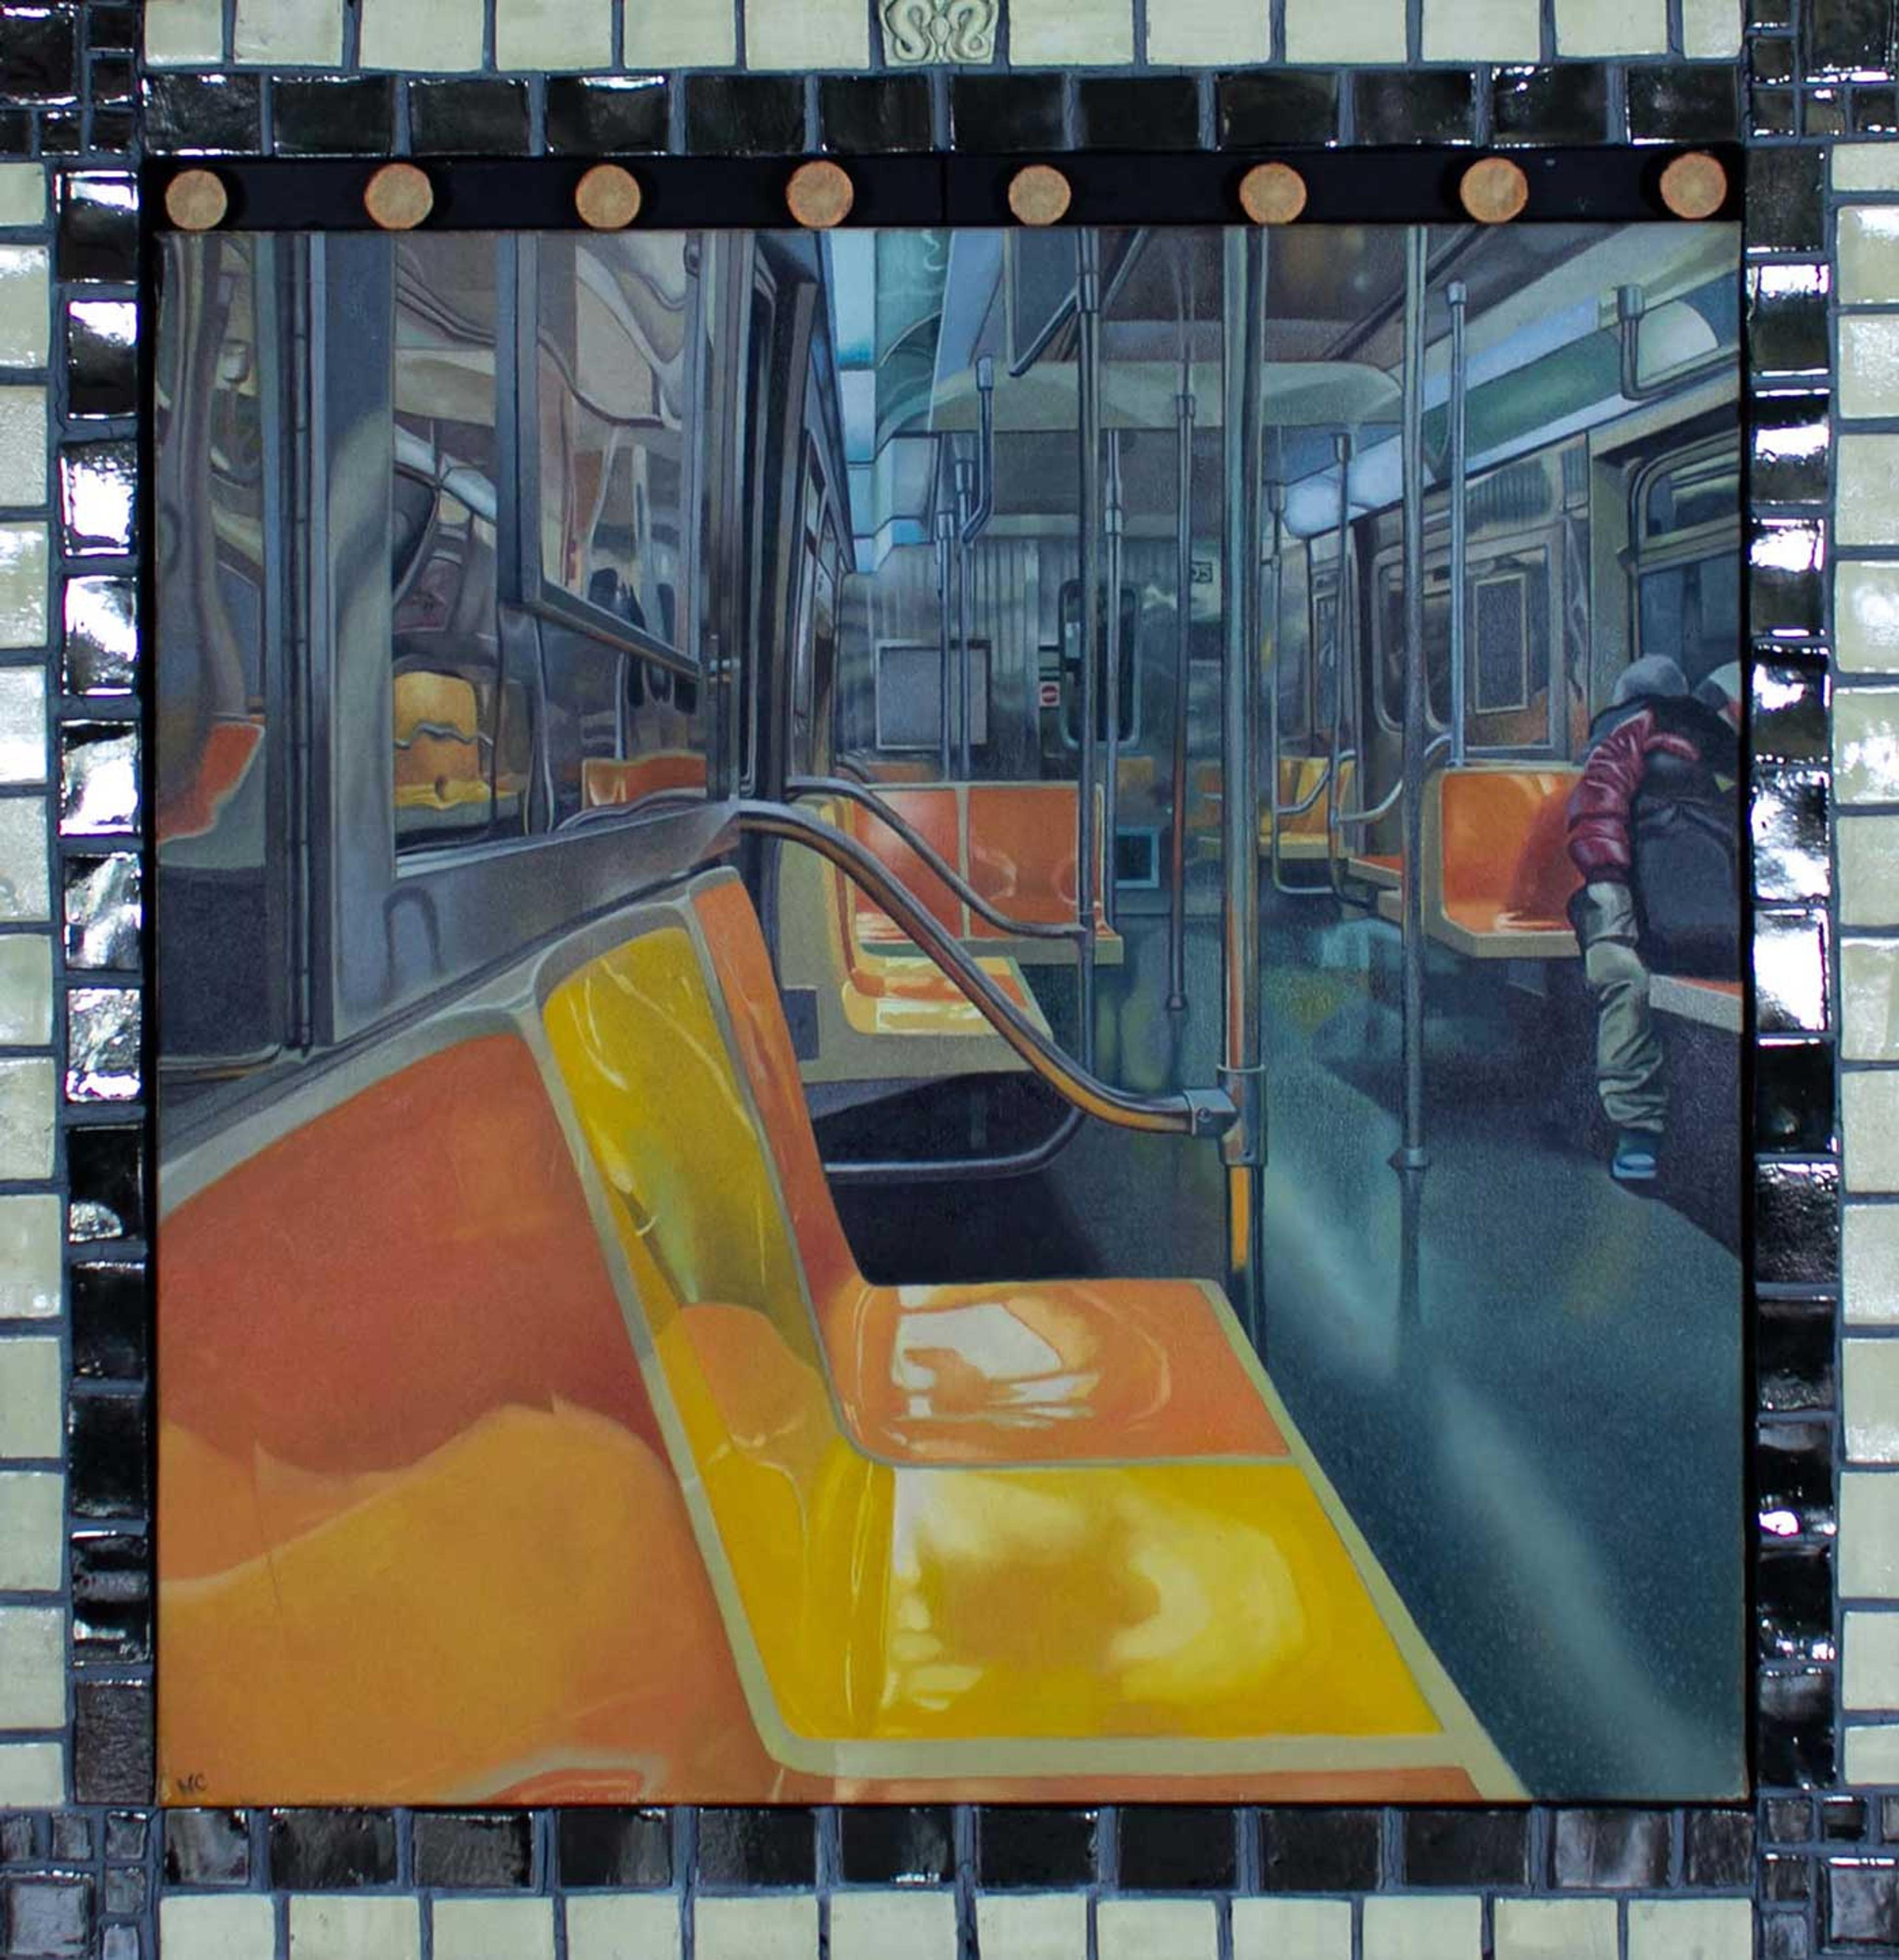 Painting of the inside of a subway car bordered by black and white ceramic tiles.